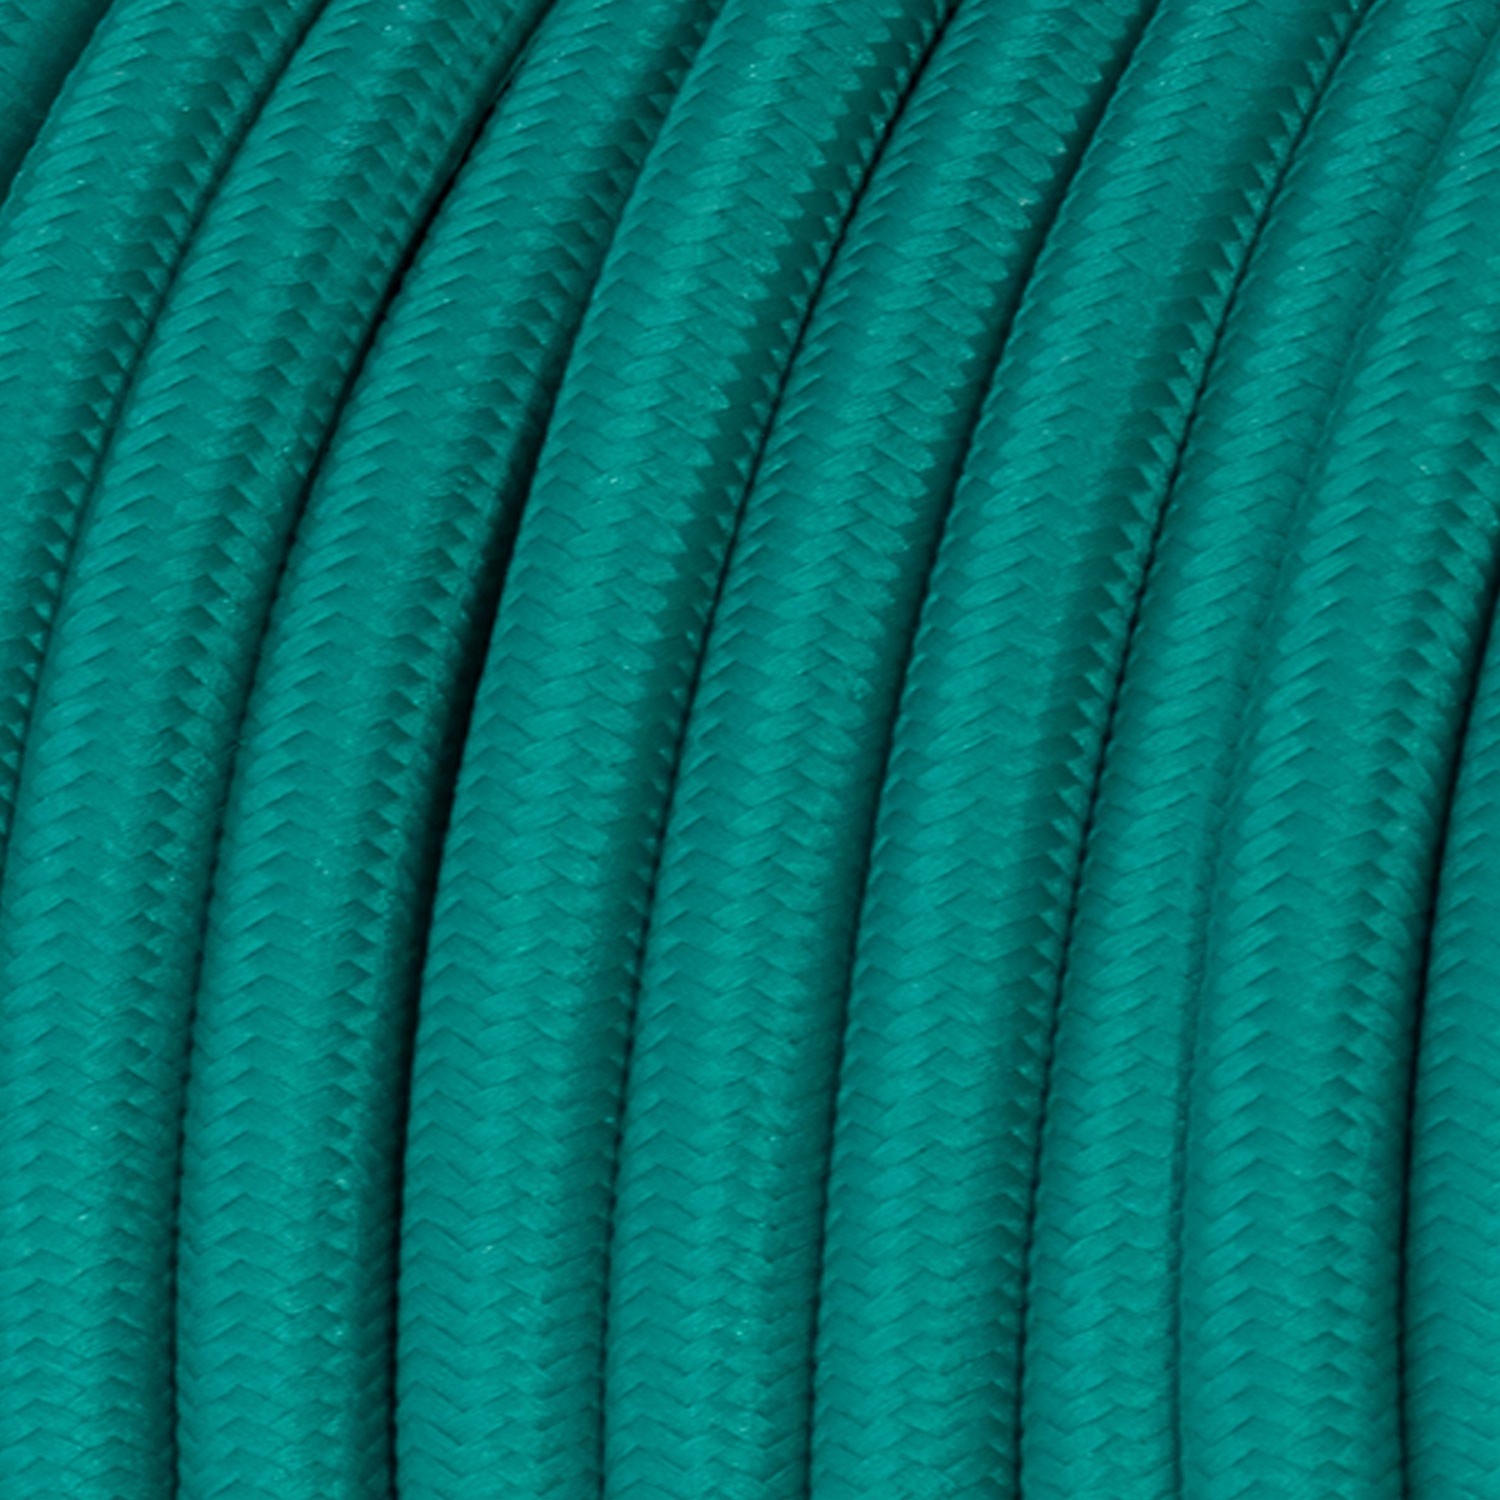 RM71 Turquoise Round Rayon Electrical Fabric Cloth Cord Cable